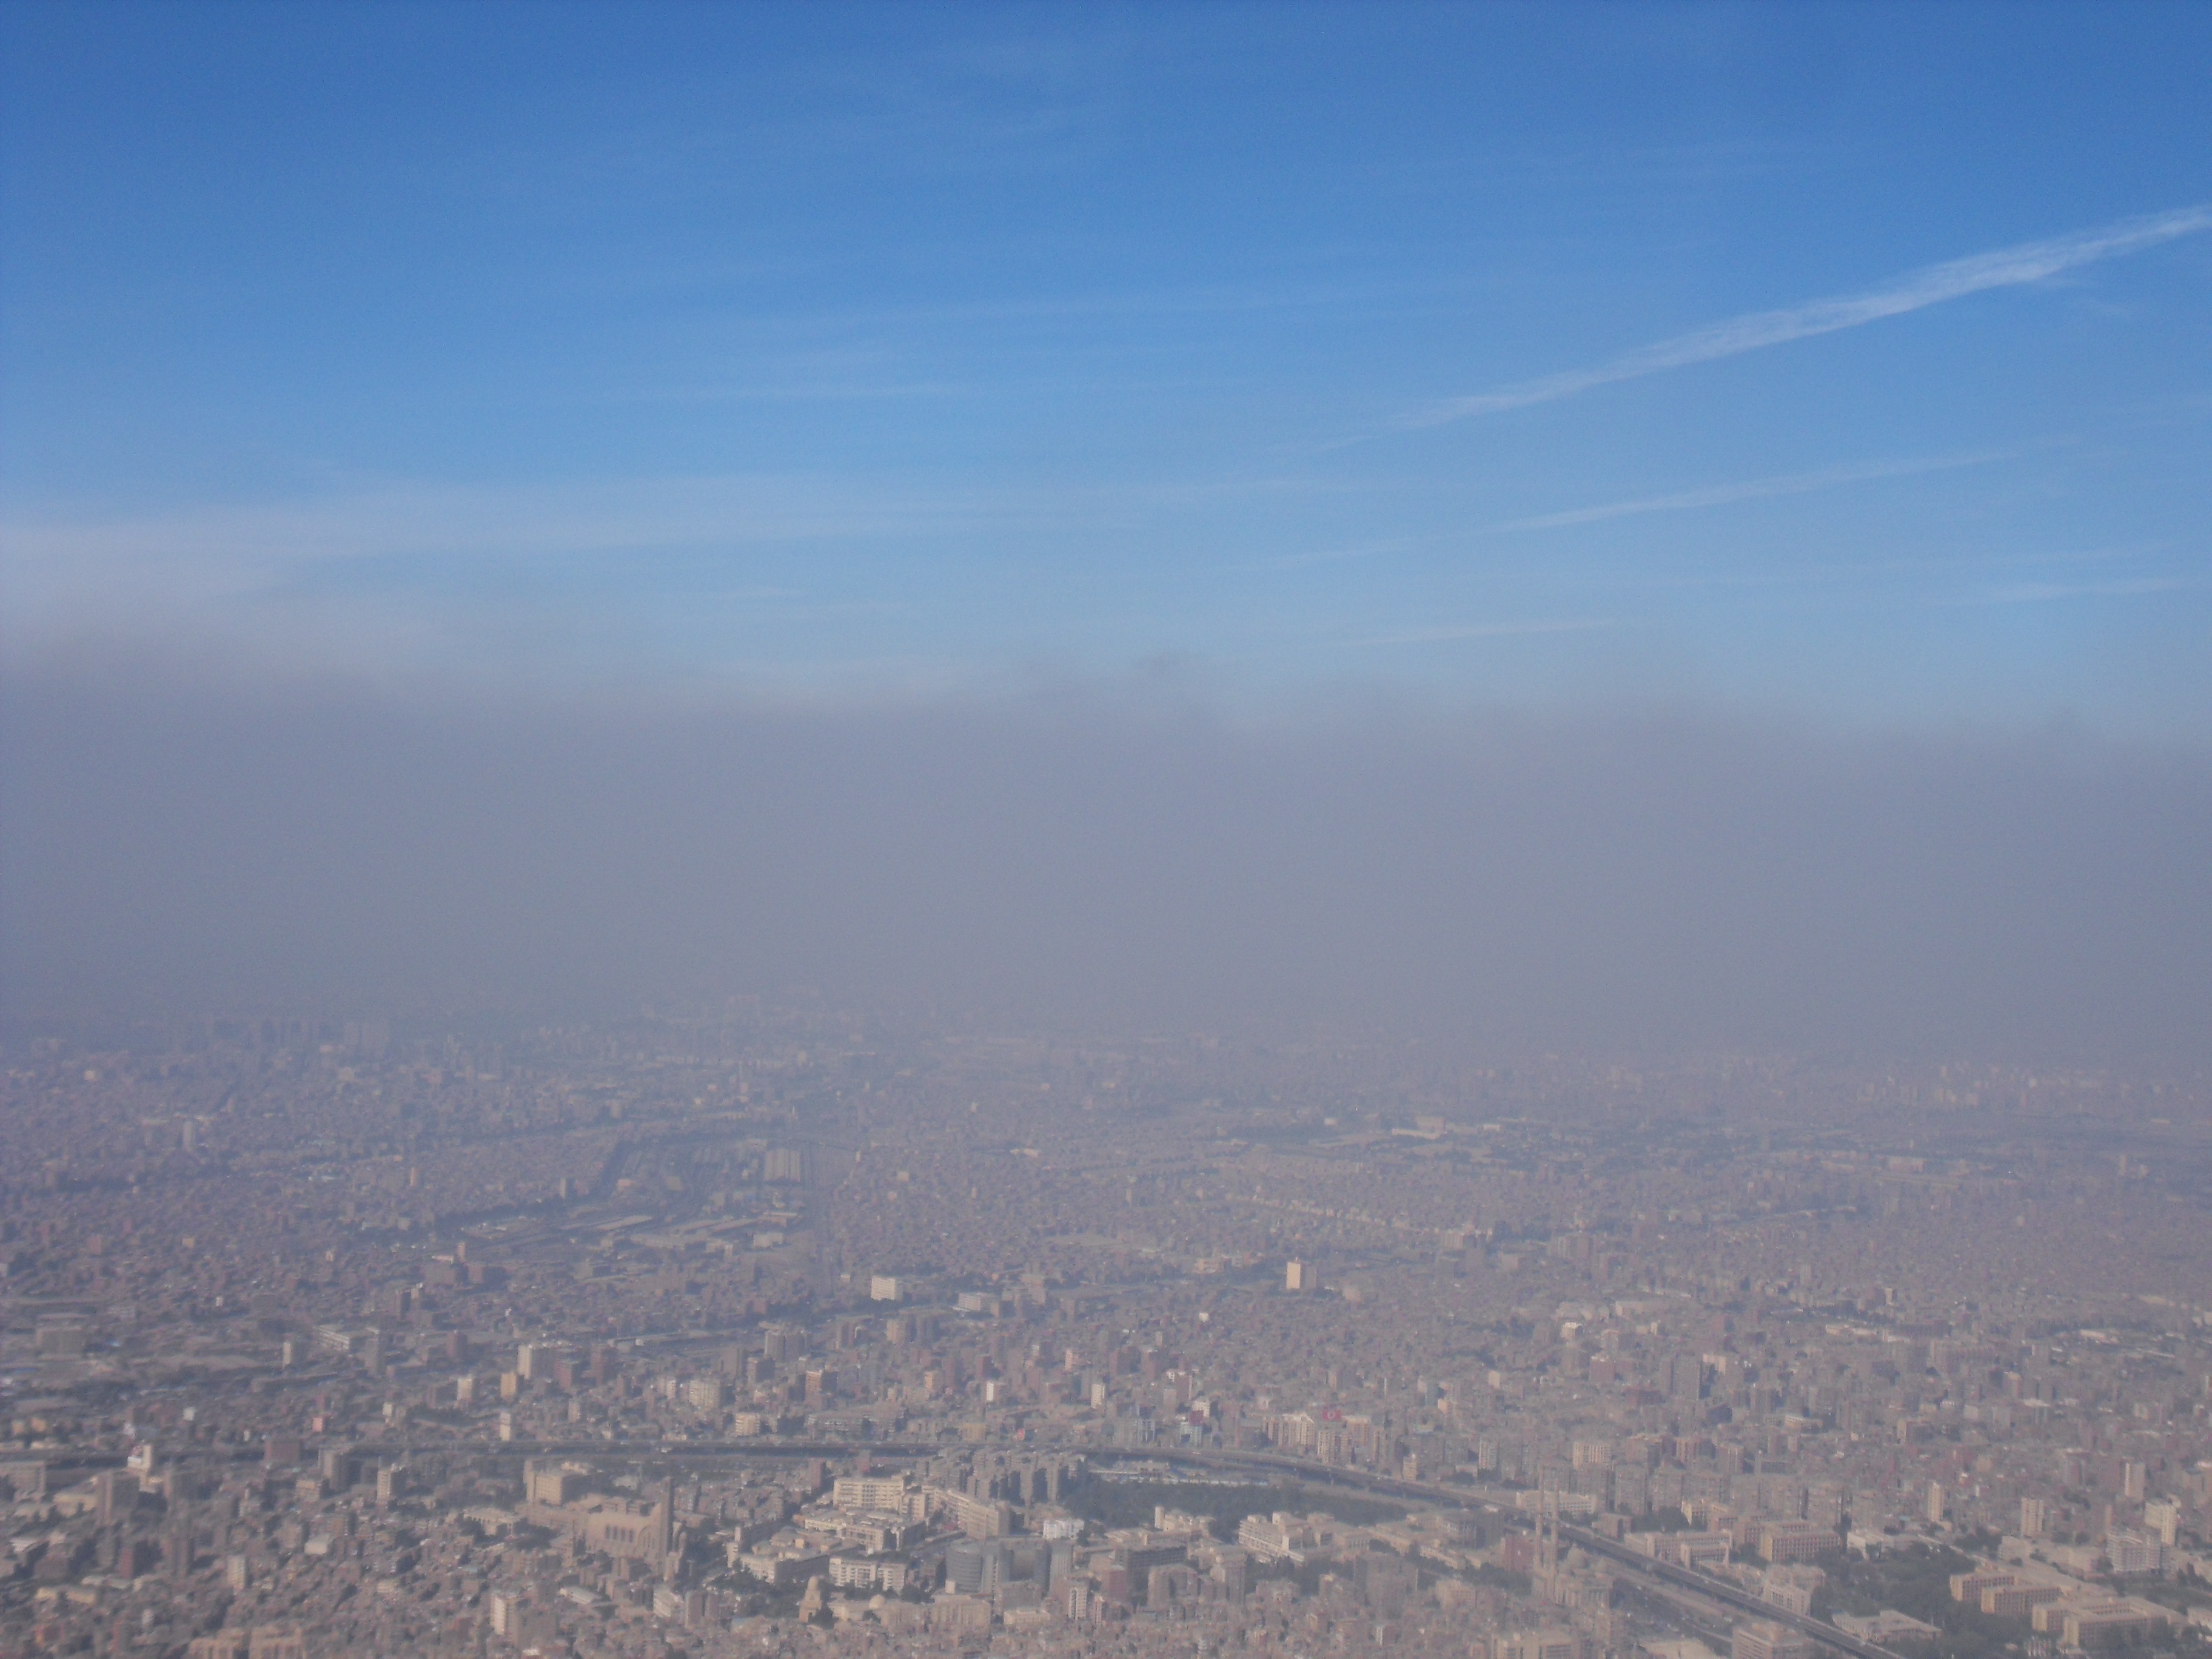 Yes. This is how 'polluted' Egypt is. The smog covers the whole of Cairo.